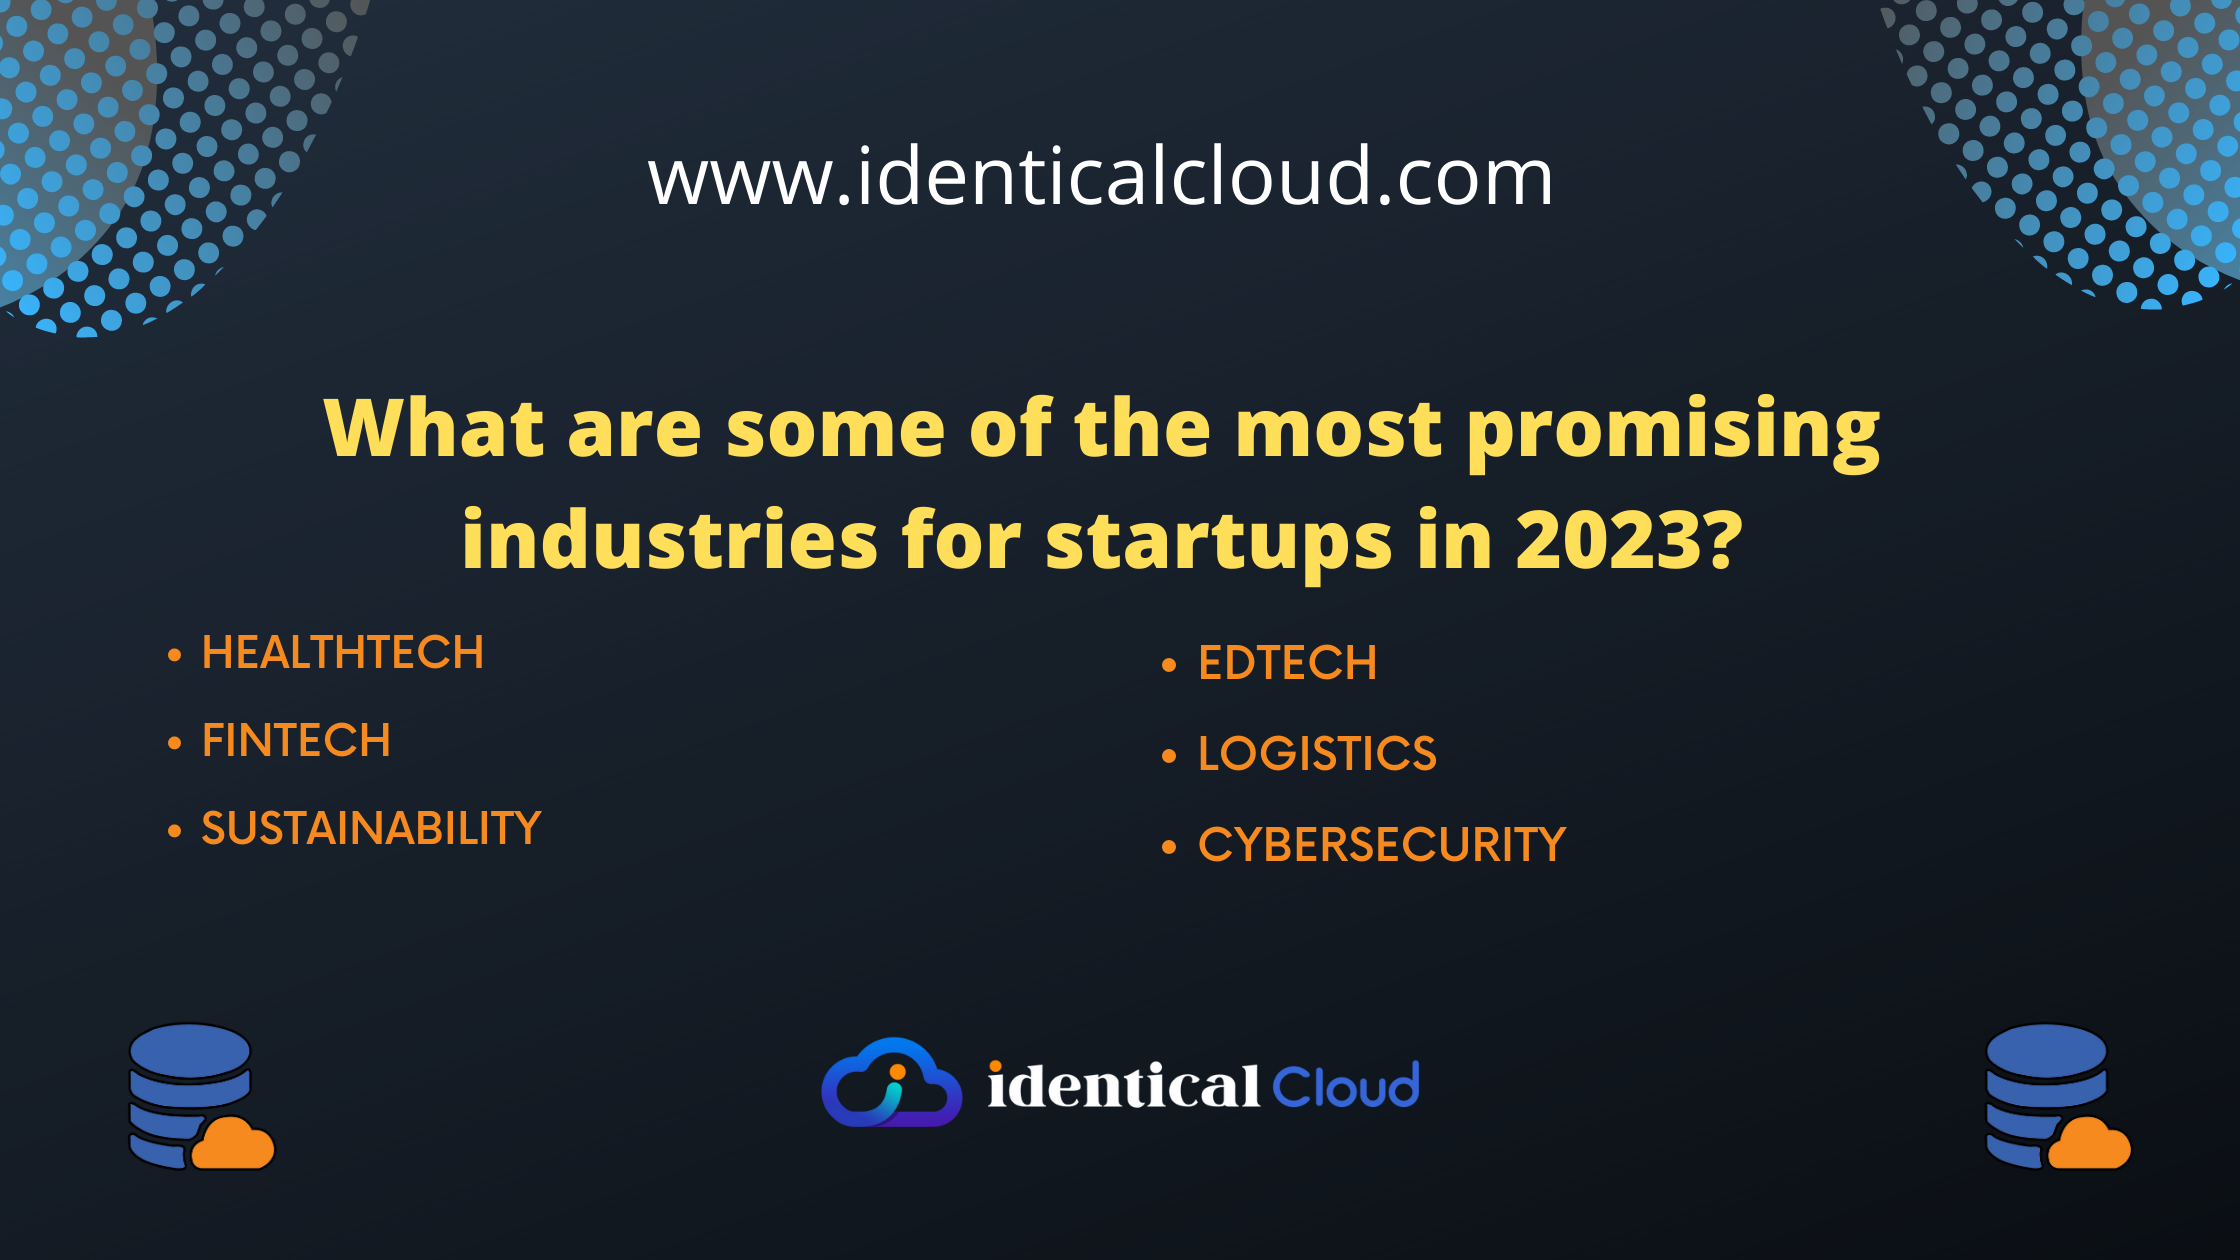 What are some of the most promising industries for startups in 2023 - identicalcloud.com